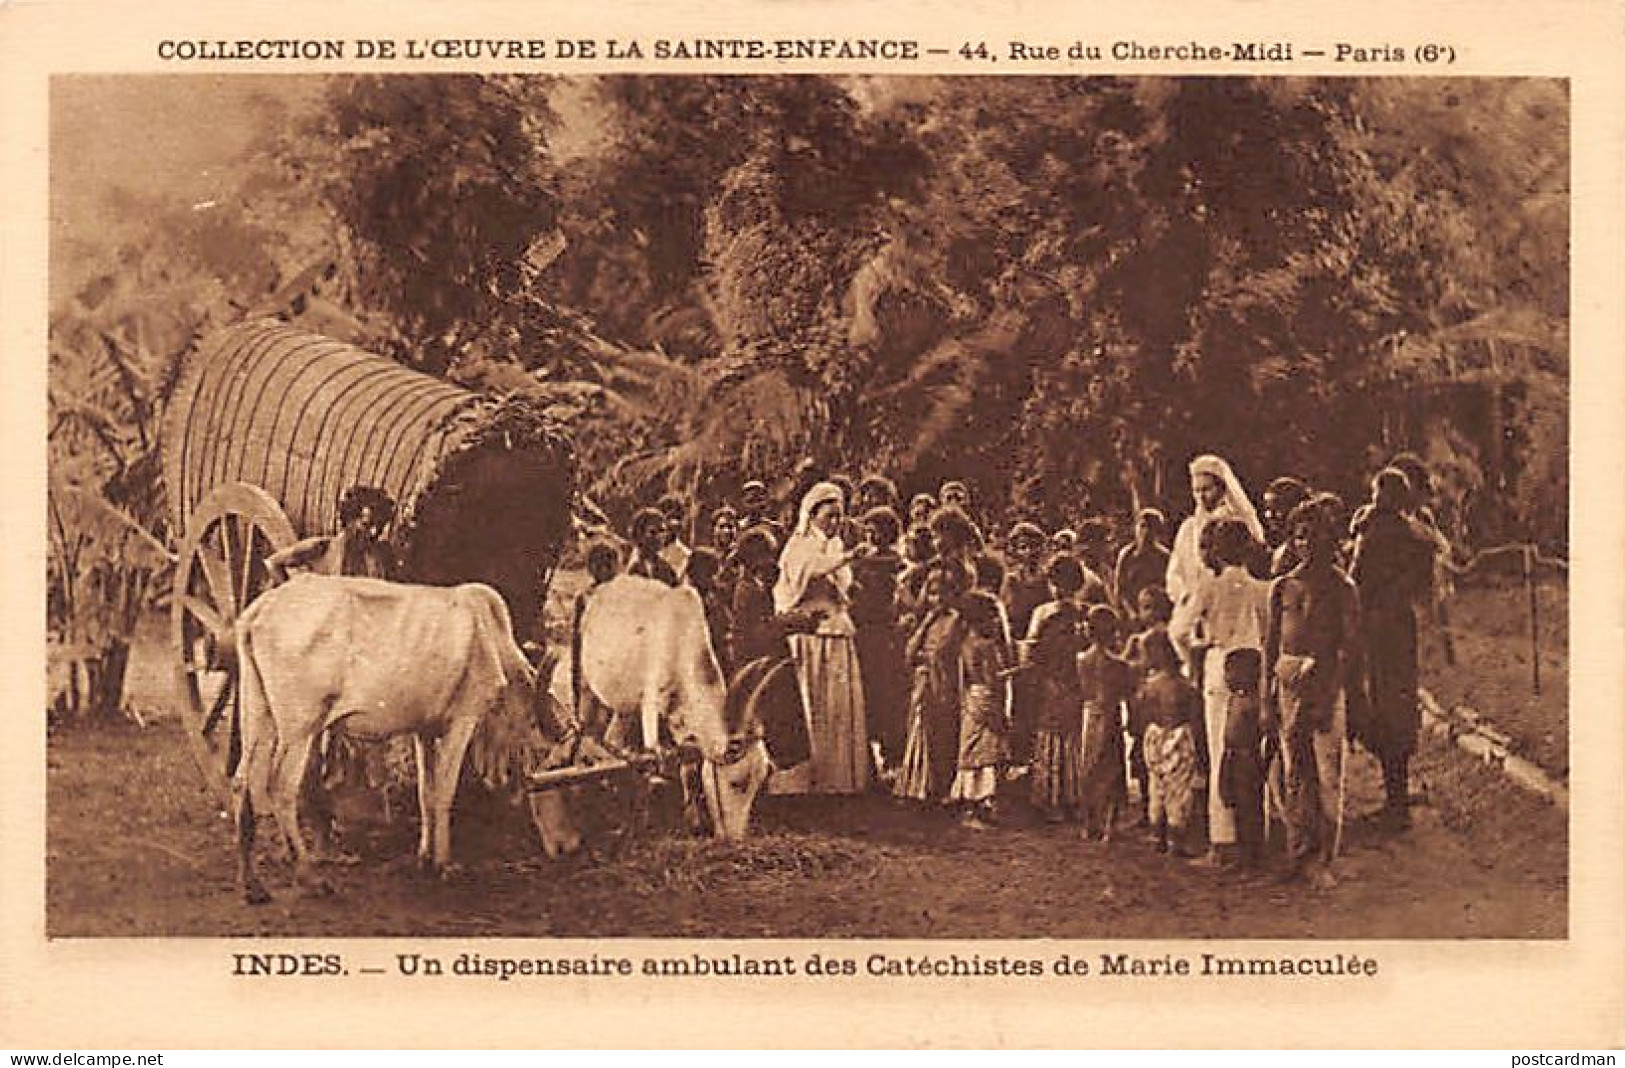 India - A Mobile Dispensary Of The Missionary Catechists Of Mary Immaculate - Publ. Oeuvre De La Sainte-Enfance  - India